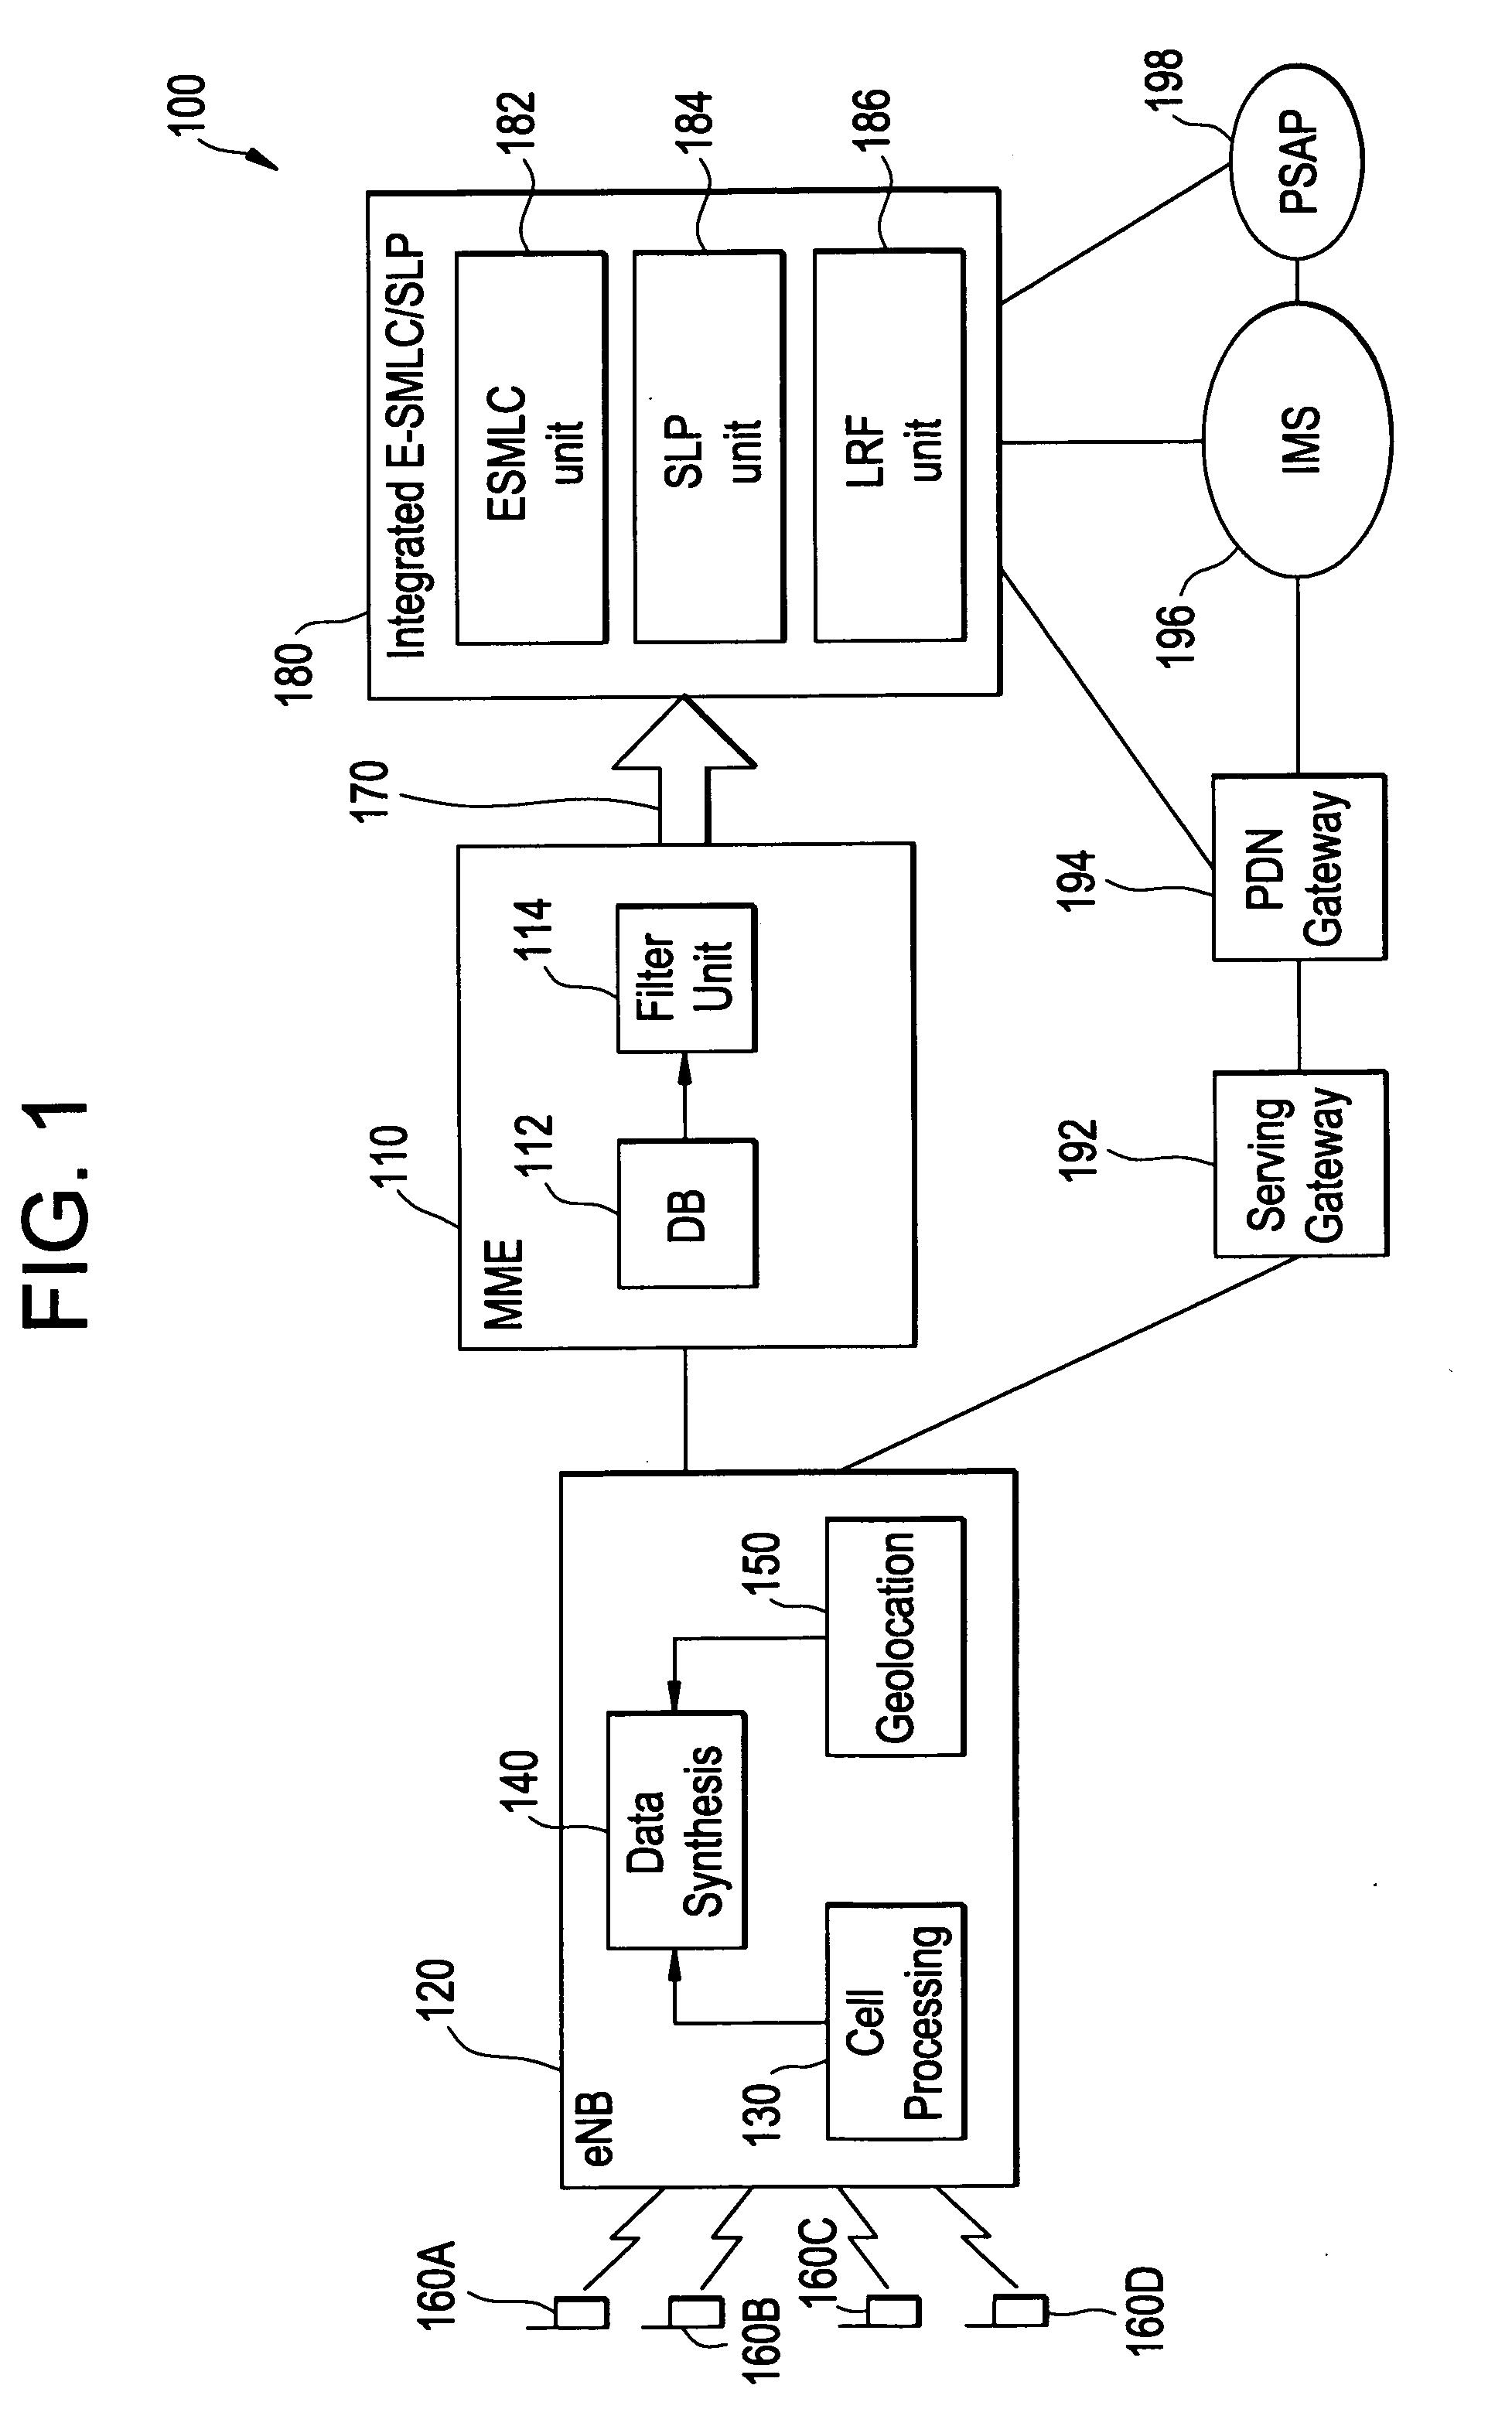 Method for providing presence and location information of mobiles in a wireless network